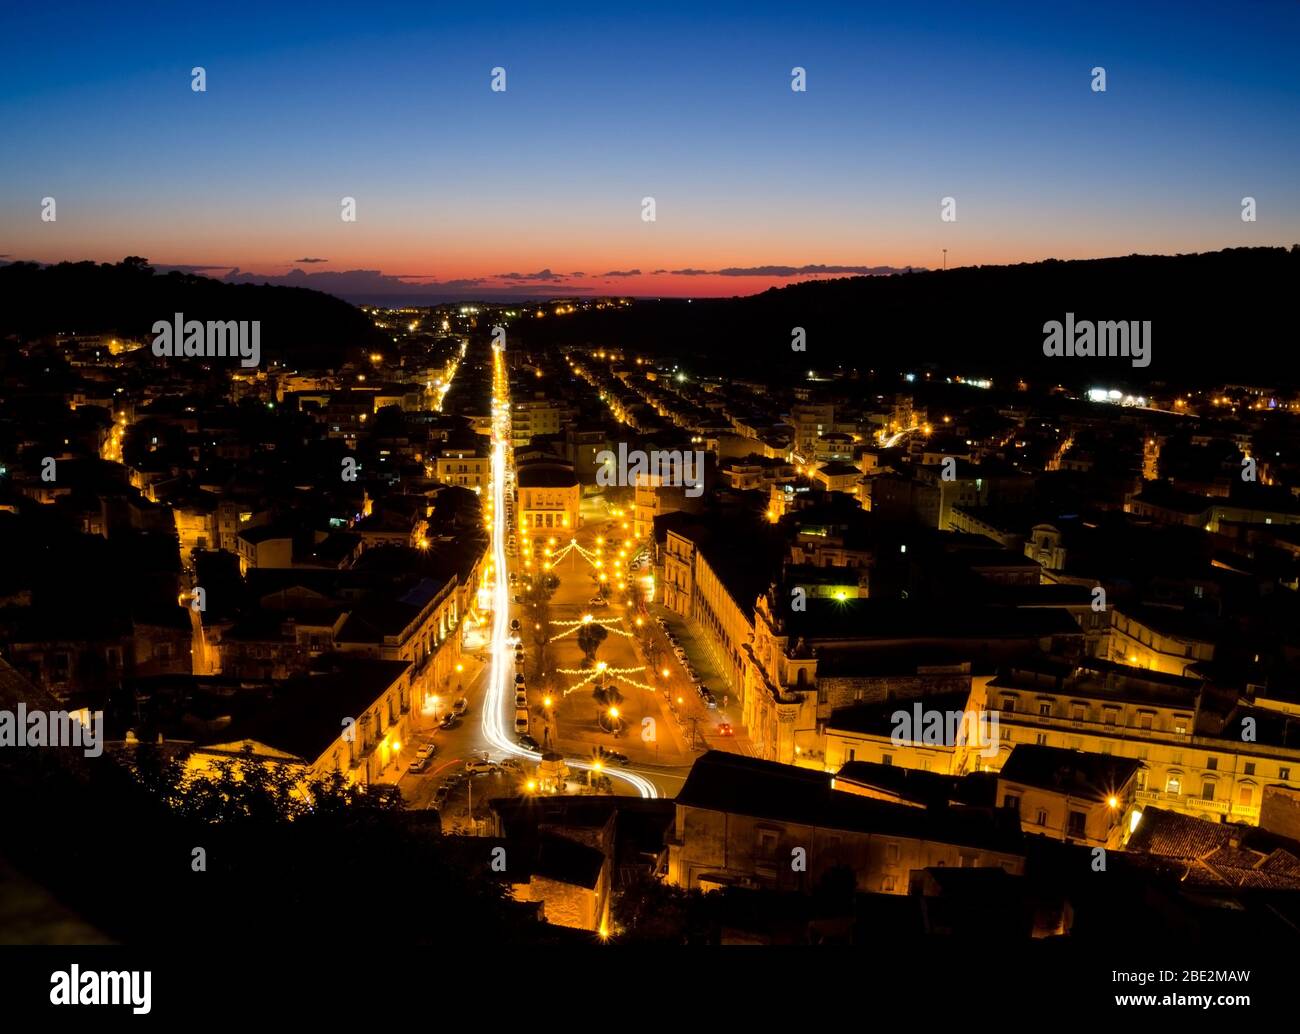 SCICLI, SICILY, ITALY. 31st December 2019. An evening view across the town of Scicli from the Chiesa di San Matteo down Corso Garibaldi towards the se Stock Photo